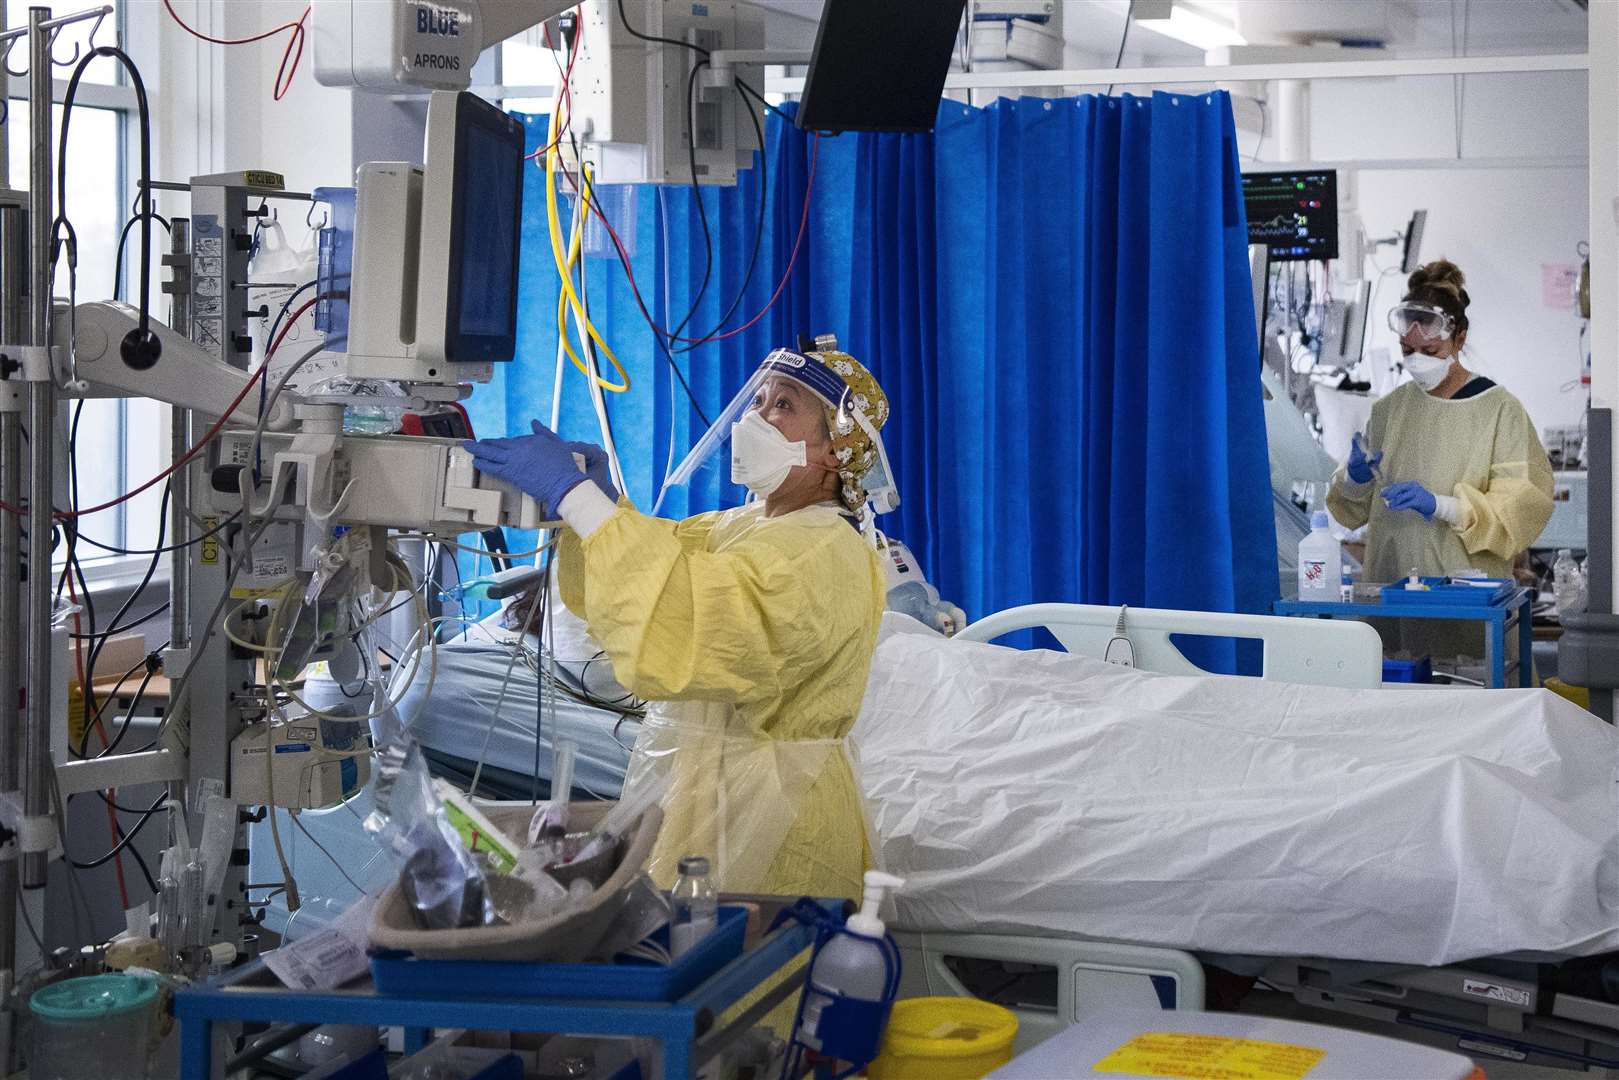 Nurses work on patients in the ICU at St George’s Hospital in Tooting, south-west London (Victoria Jones/PA)